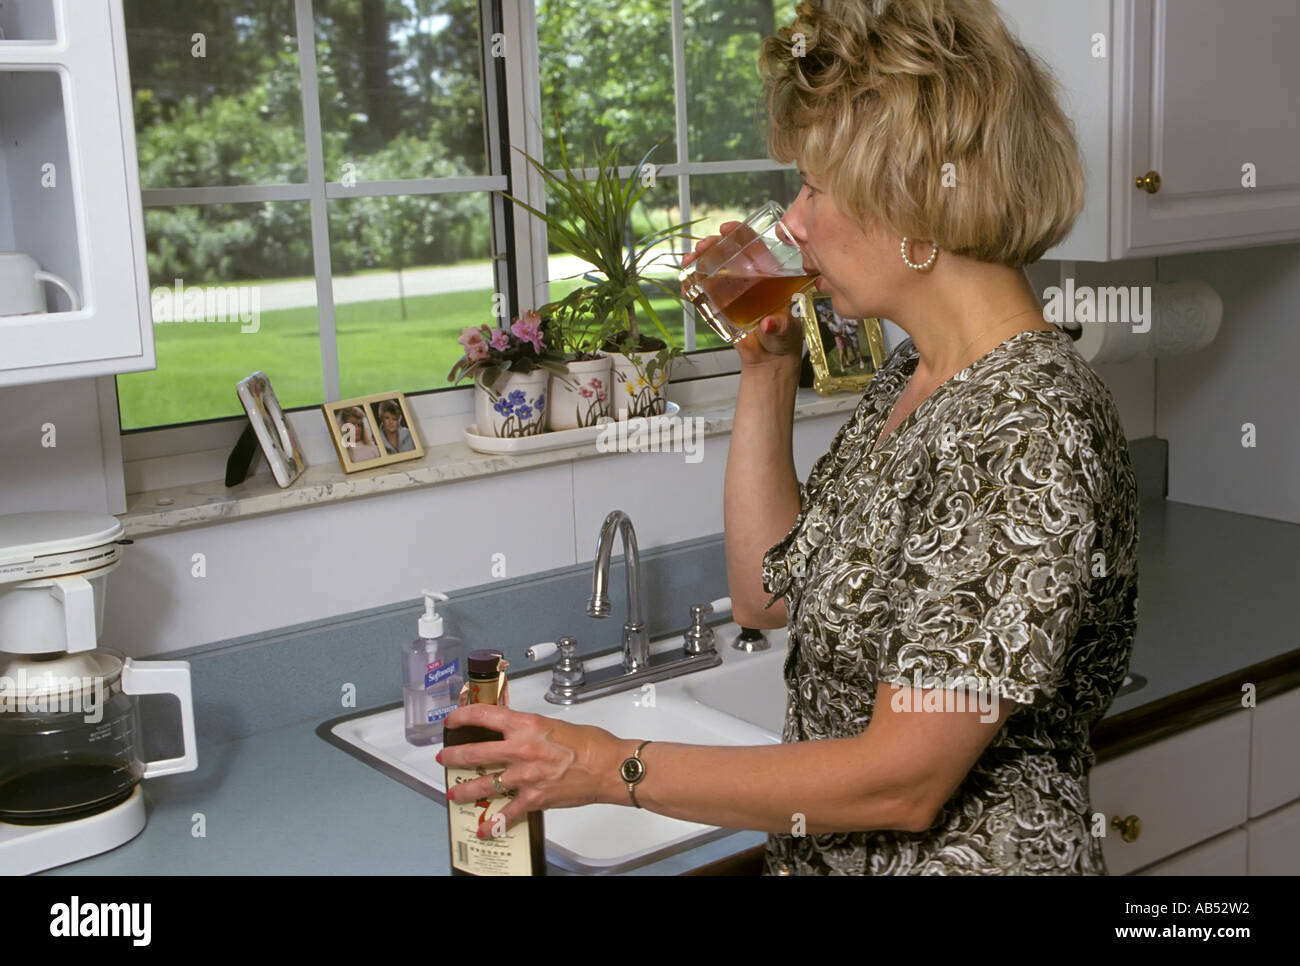 Adult female woman drinking alcohol during the daytime at home Stock Photo